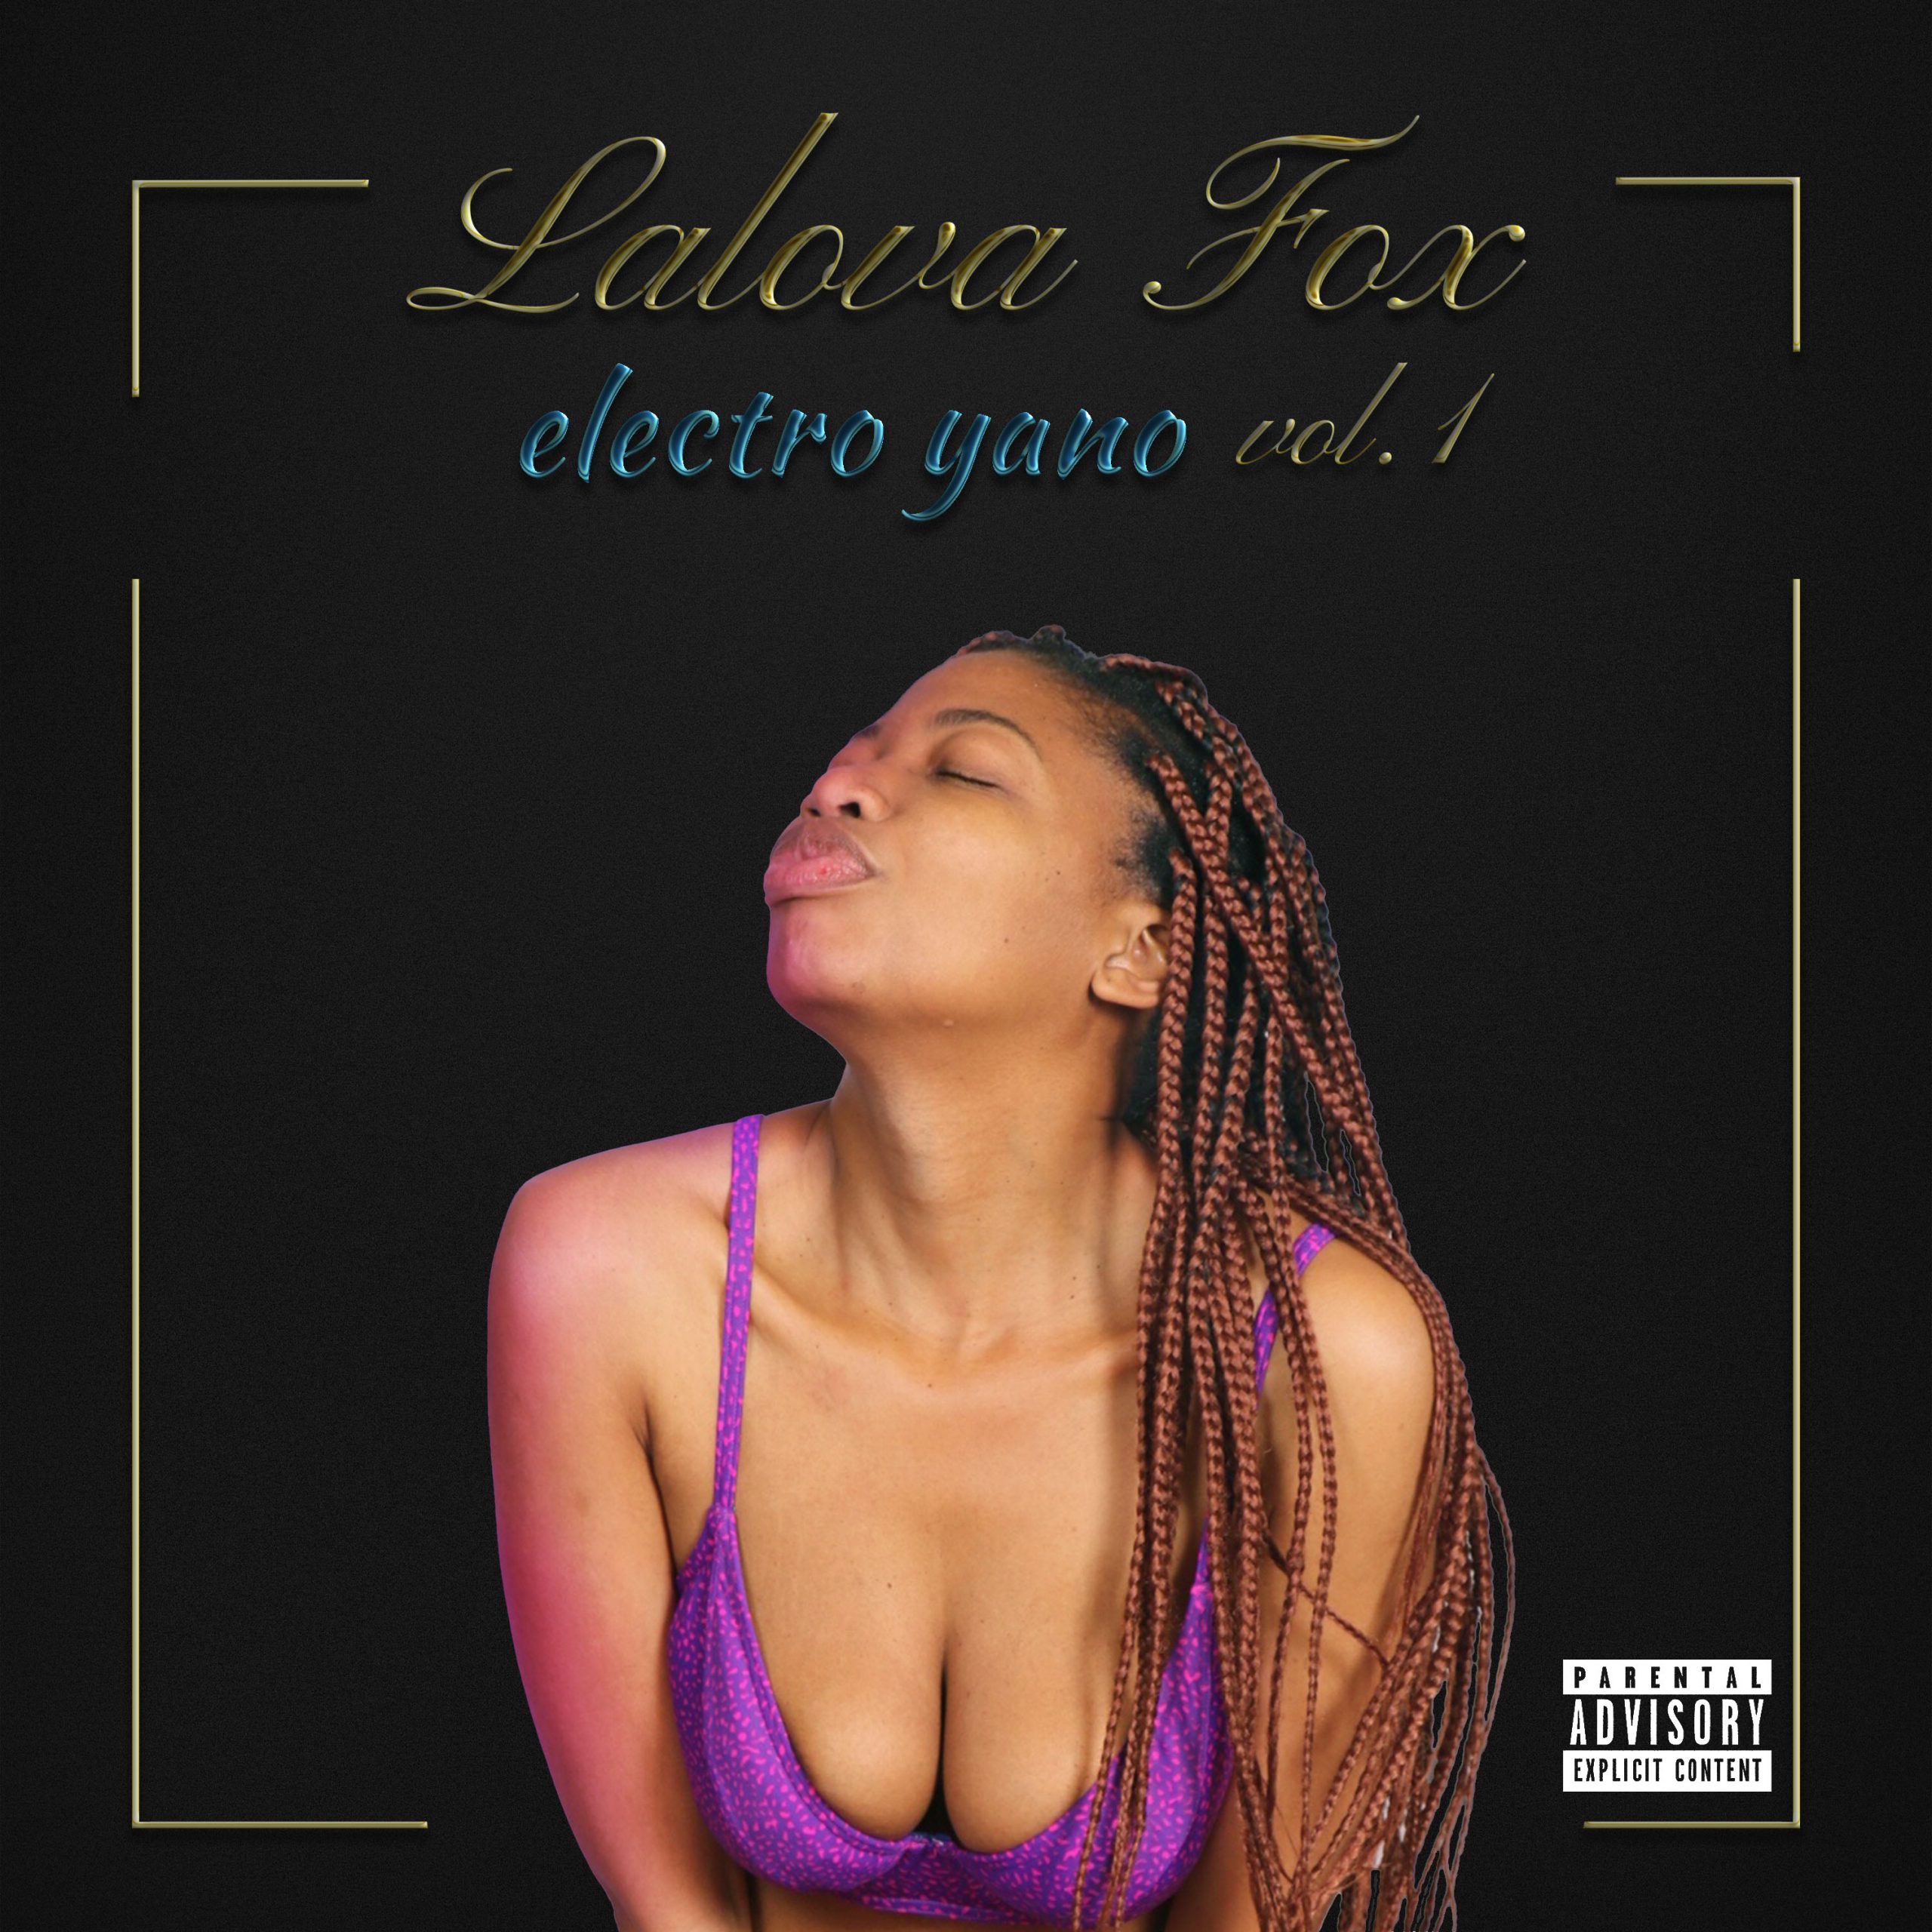 NEW ON THE PLAYLIST: Lalova Fox is taking the music scene by storm with her unique genre-mixing electro house and Amapiano sounds. NDIM LO is now on Bafana FM.